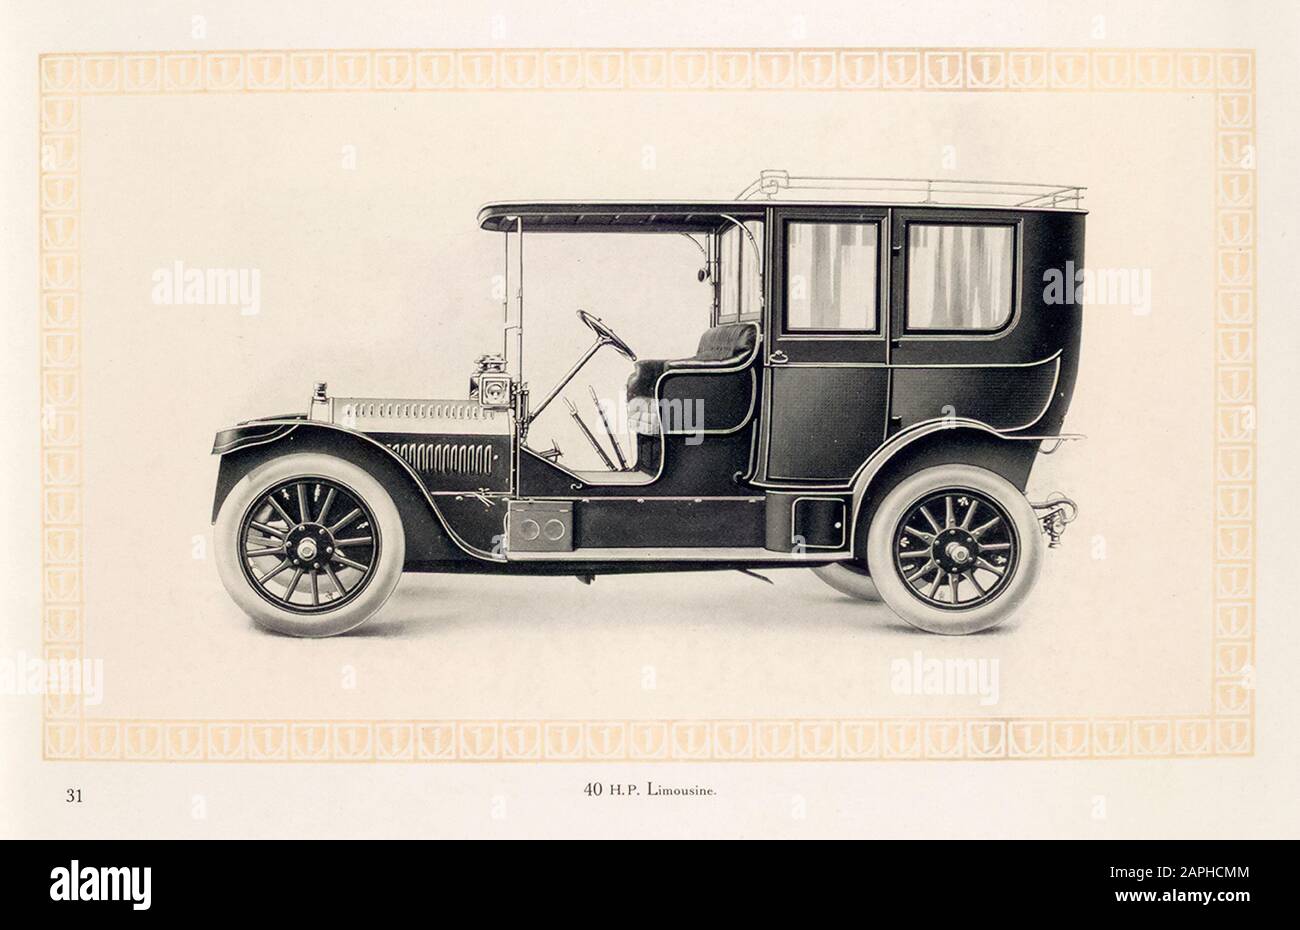 Vintage car, Benz motor car, automobile, 40 hp Limousine, from the Benz & Co trade catalogue, illustration 1909 Stock Photo